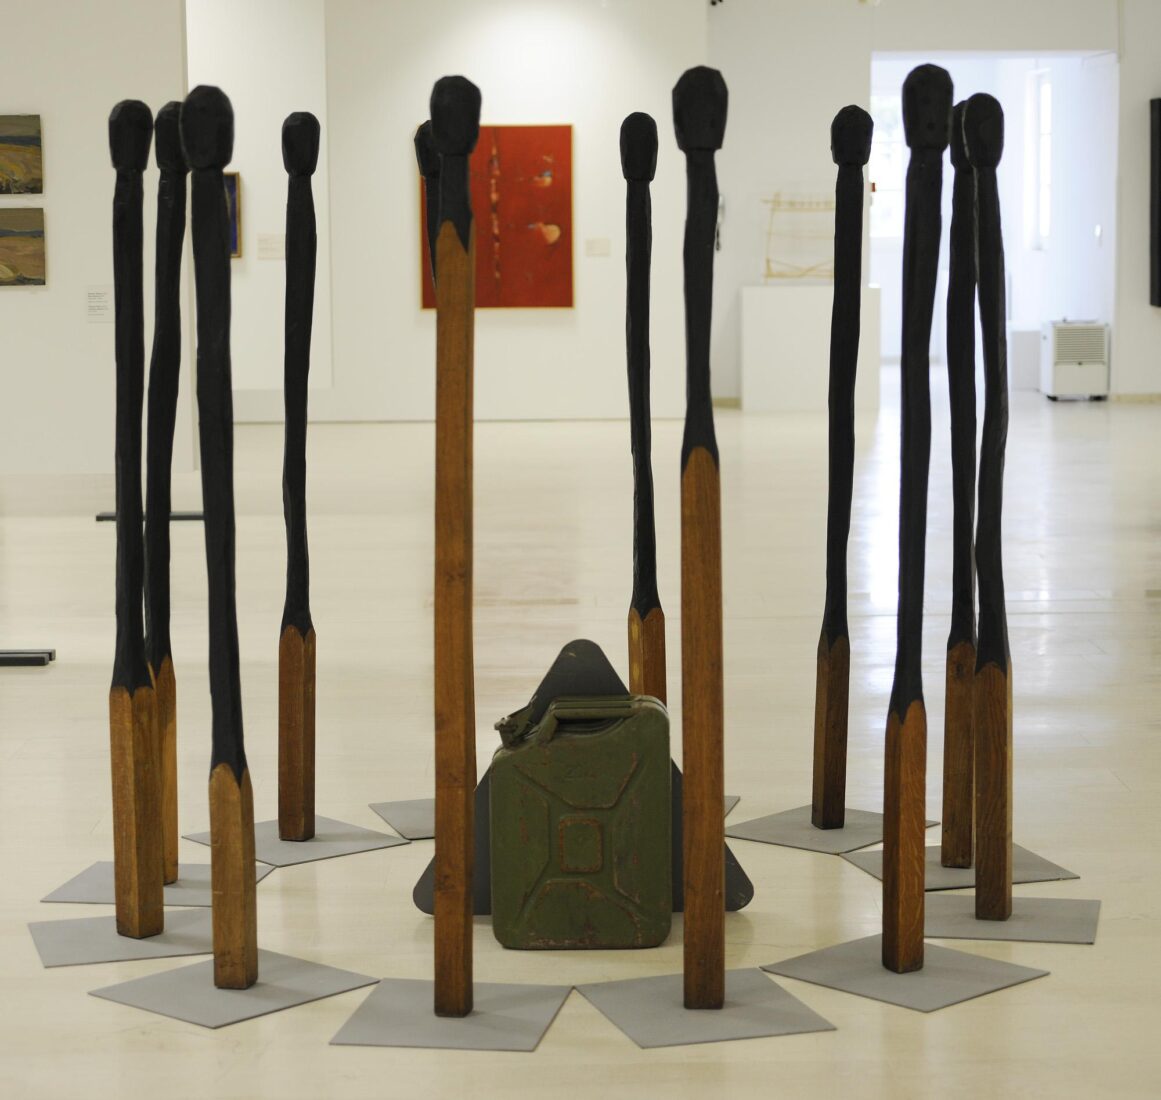 Installation with 12 Matches, a Signpost and a Container - Paralis Nikos